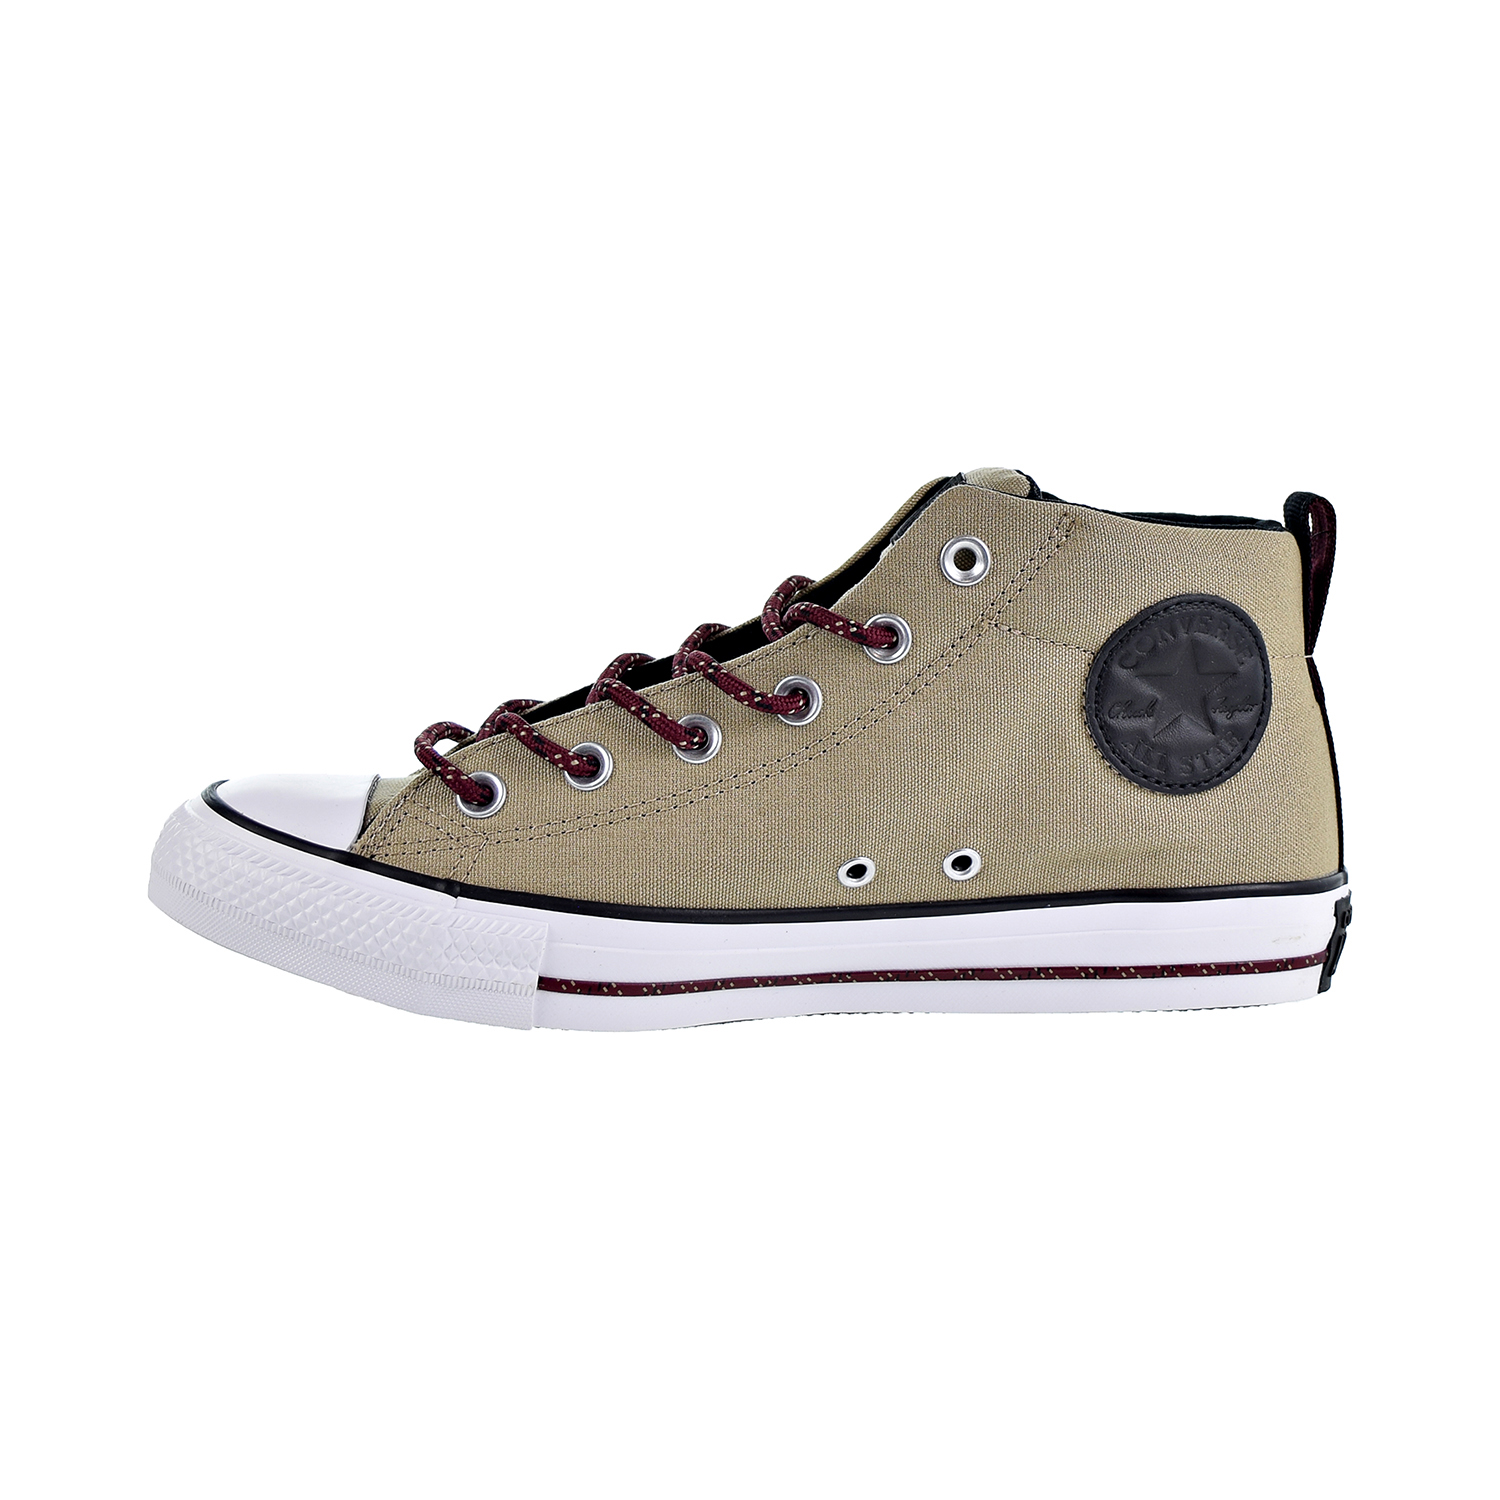 Converse Chuck Taylor All Star Street Mid Unisex Shoes Khaki/Black/White 162383f - image 4 of 6